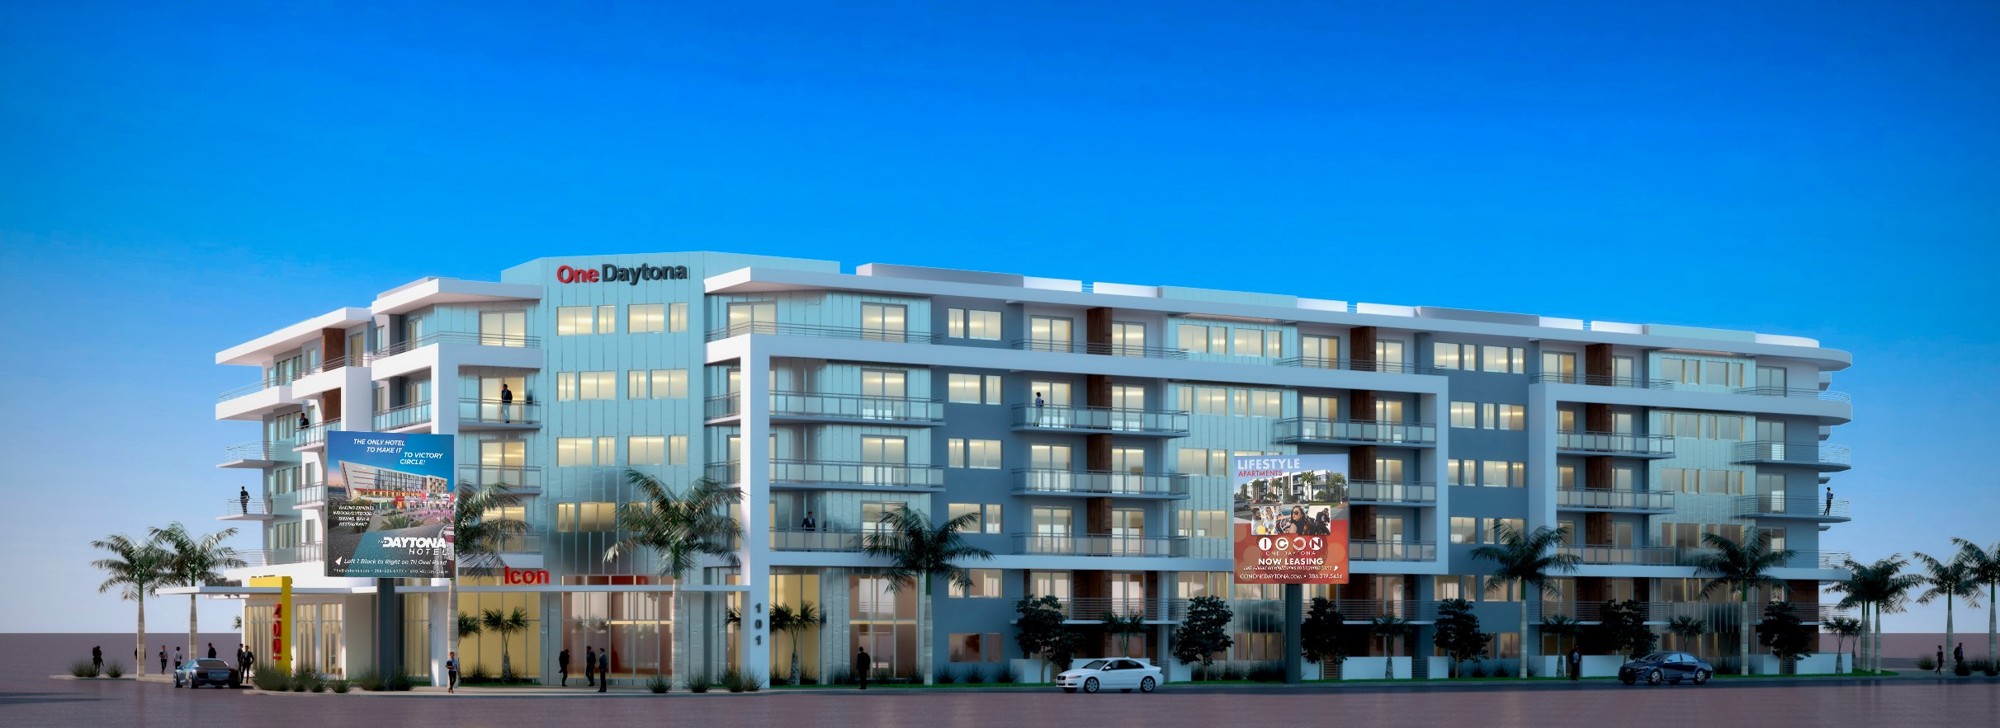 A new 120-unit multi-story luxury apartment complex will open at One Daytona. Courtesy photo